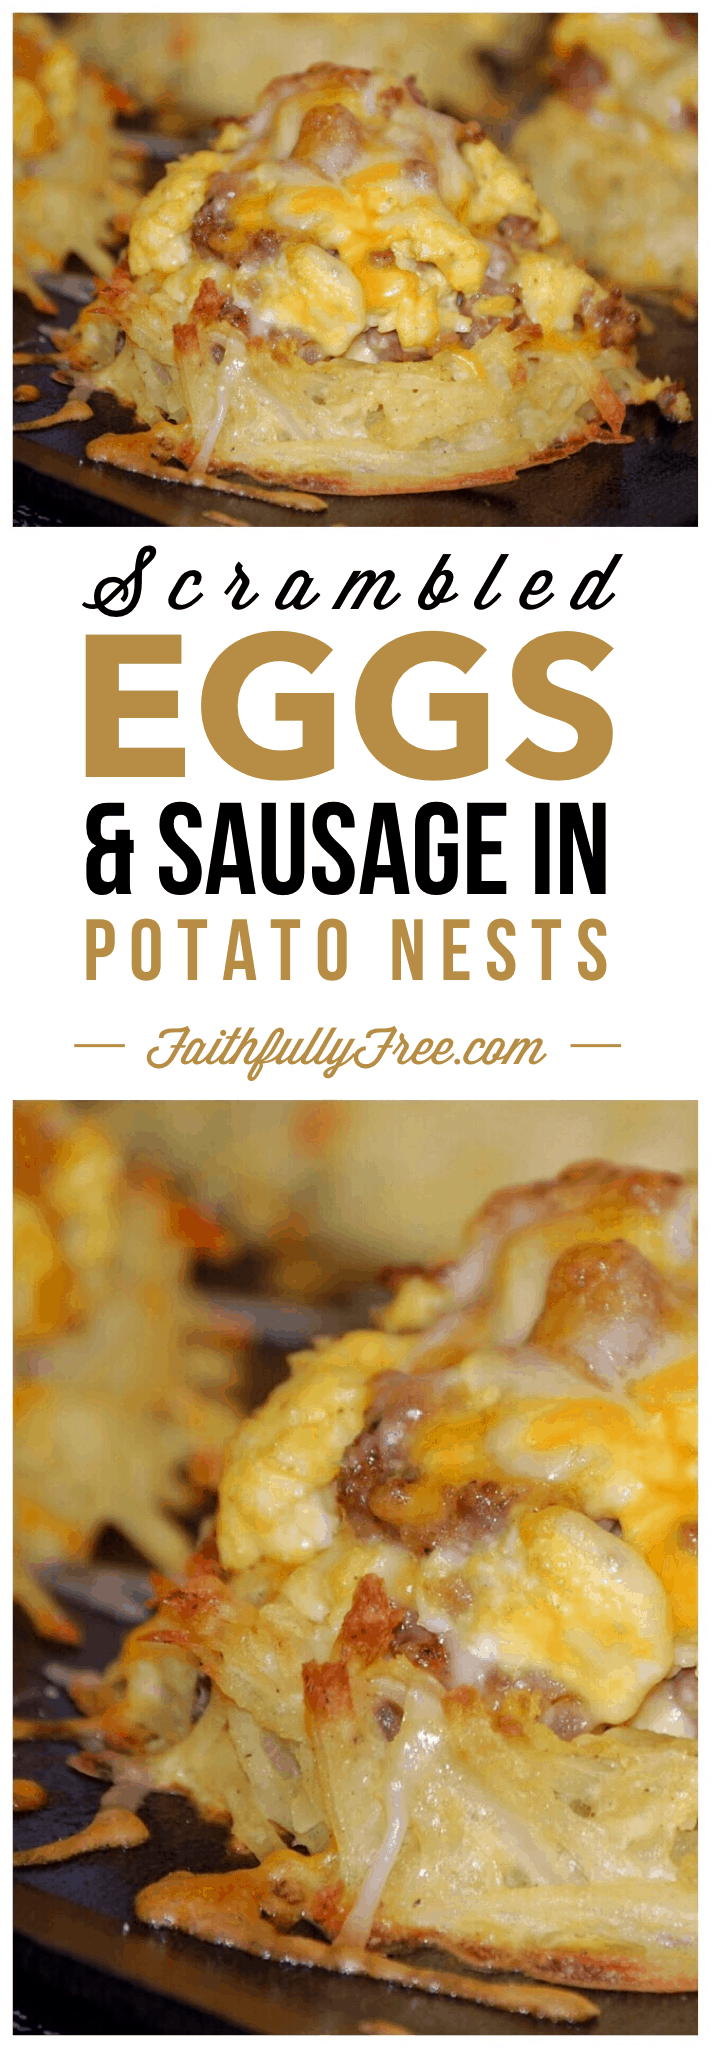 Scrambled Eggs and Sausage in Potato Nests Rest